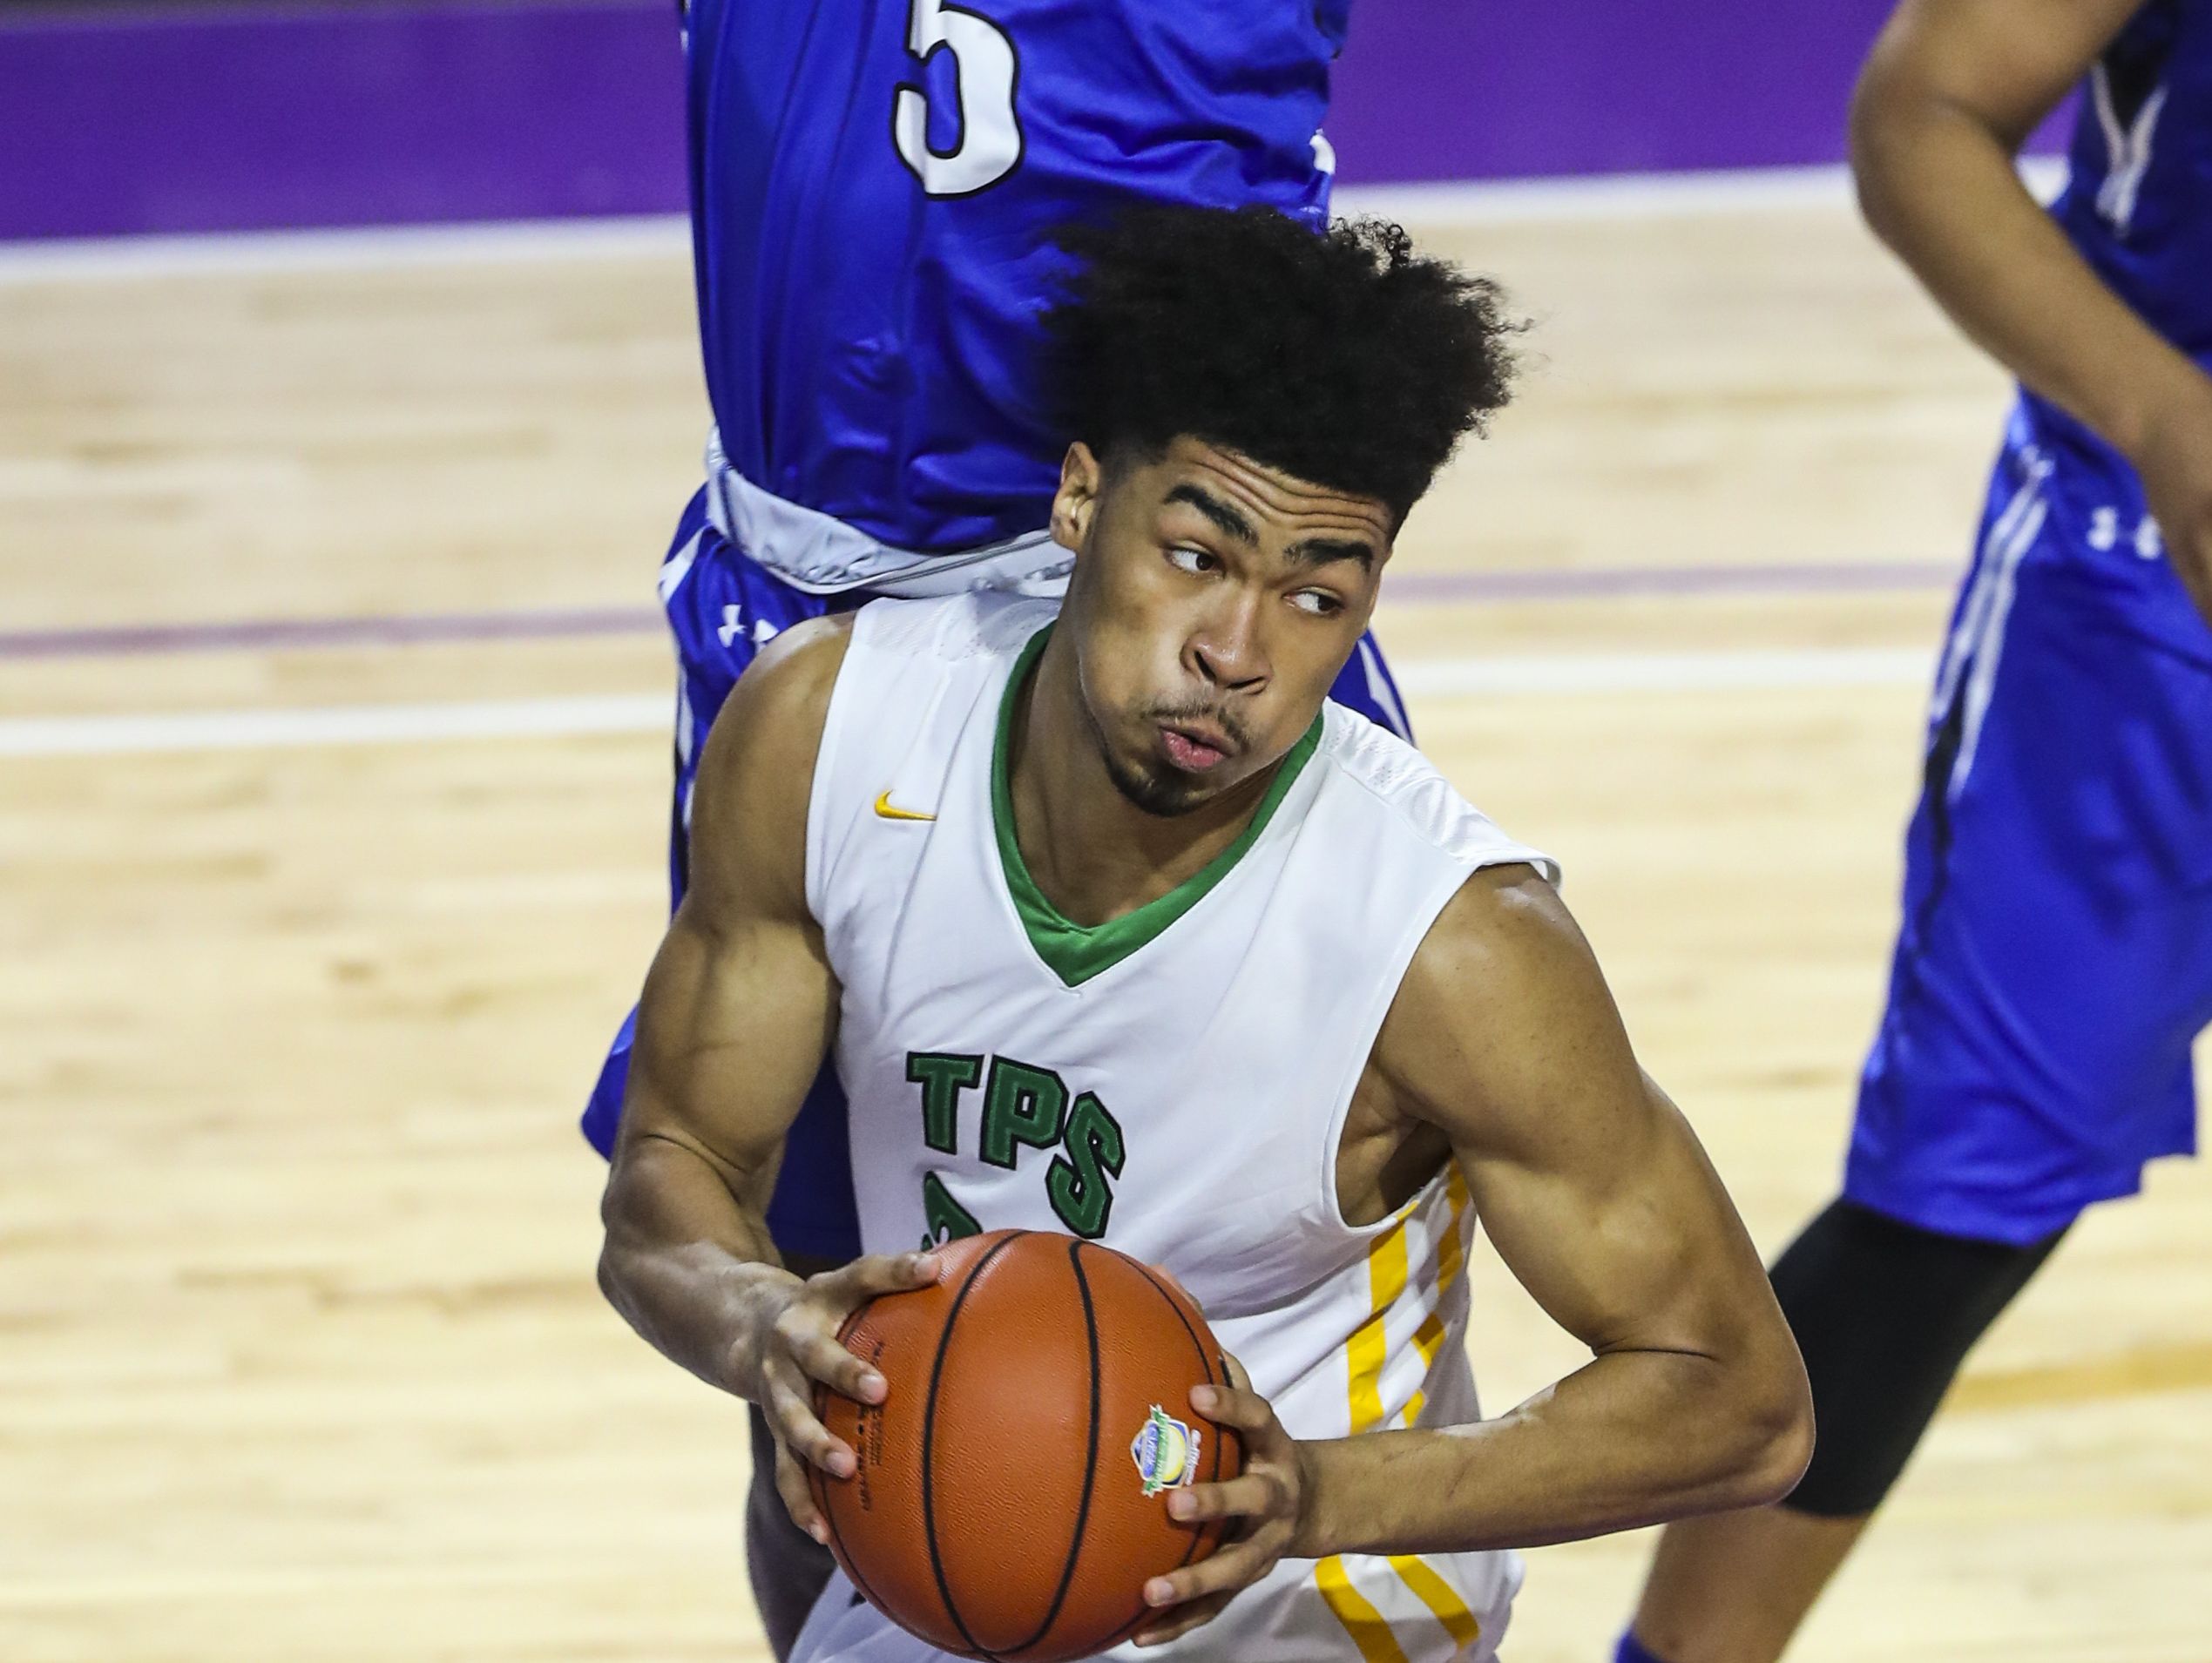 The Patrick School's Nick Richards works under the basket as IMG's Emmitt Williams defends. IMG Academy and The Patrick School played Wednesday night in their City of Palms game to determine third place.